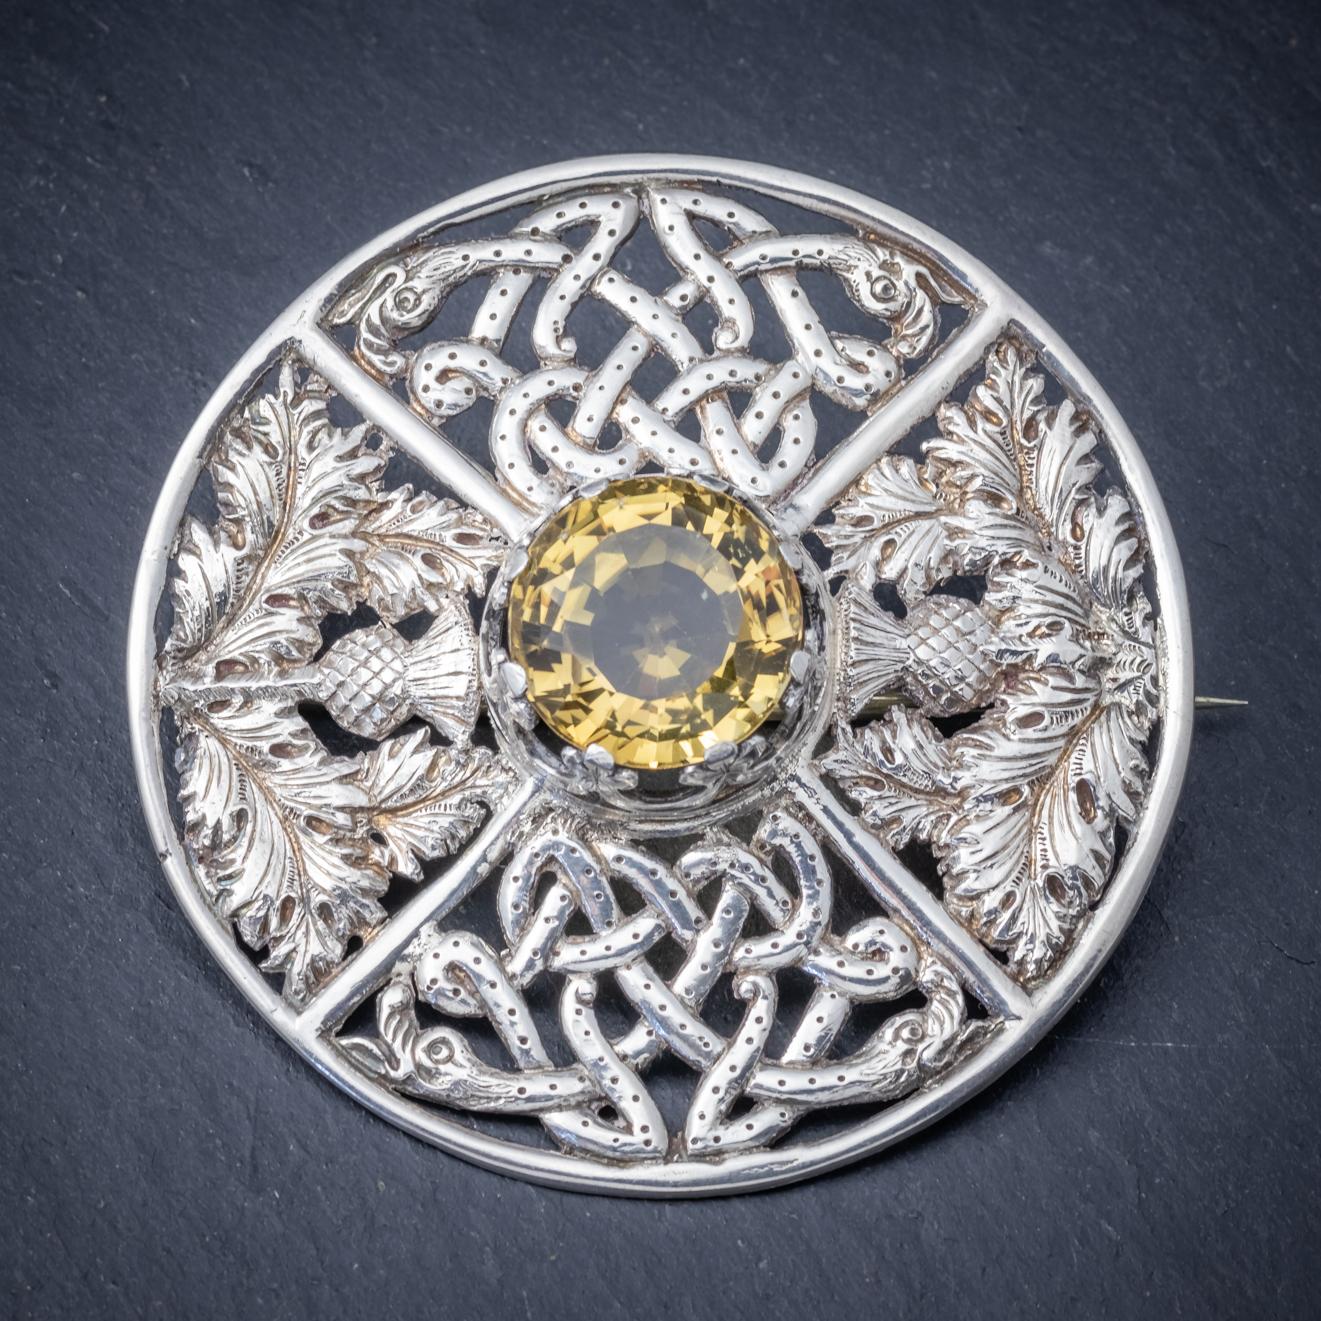 This spectacular antique Victorian Scottish brooch is fully hallmarked and dated Glasgow 1901. 

The piece boasts a magnificent golden Cairngorm in the centre which is approx. 40ct and set in a crown-shaped mount. 

The brooch is modelled in